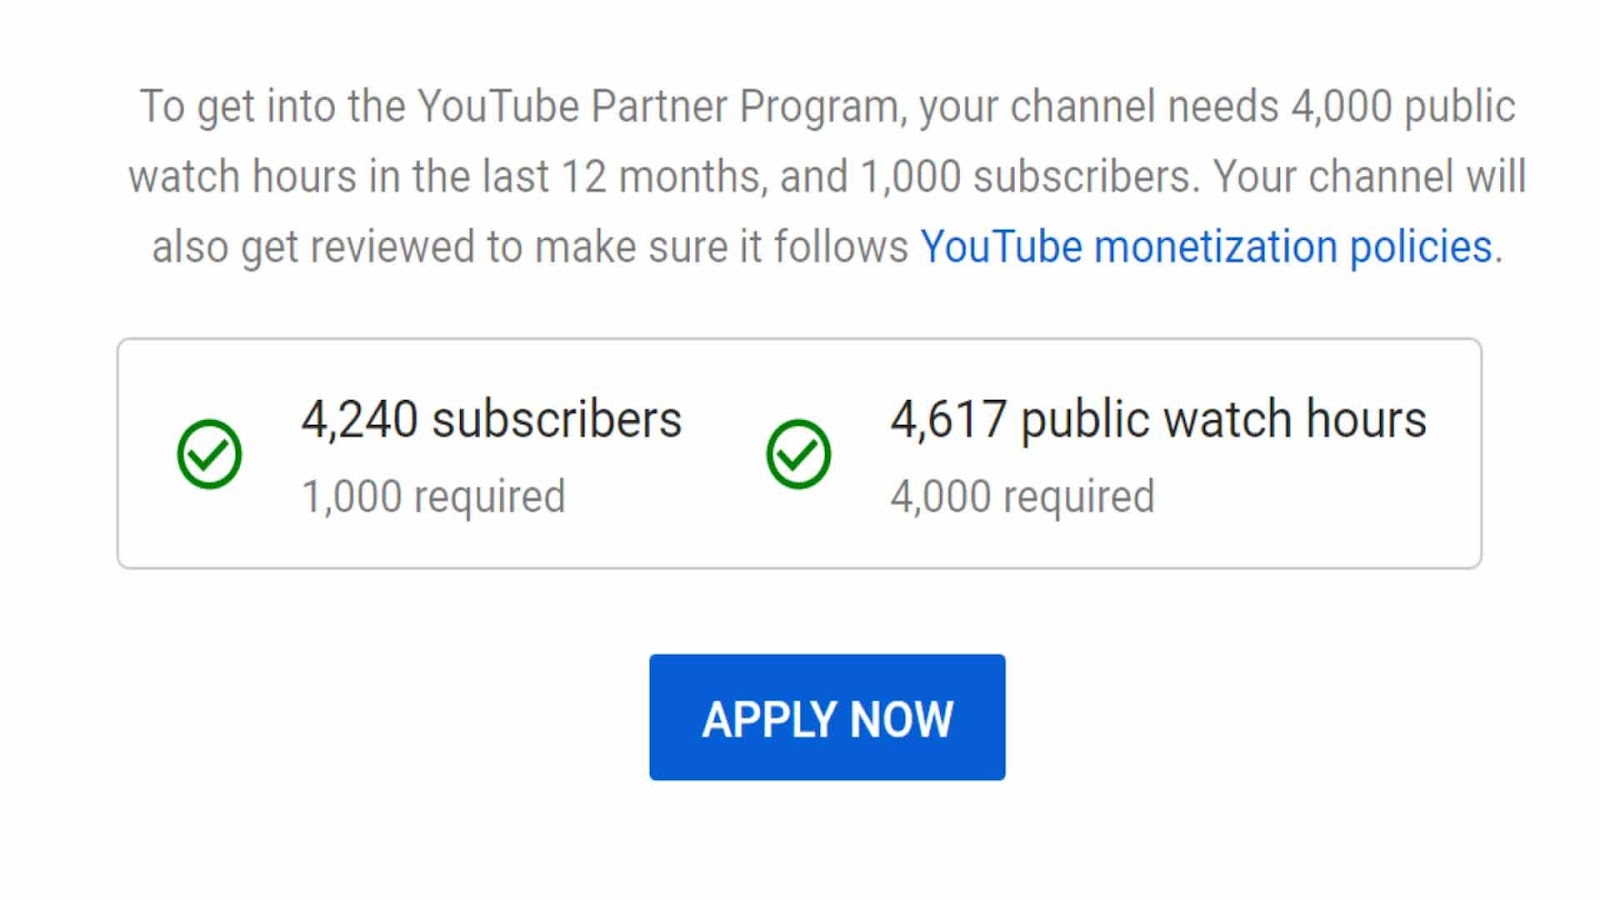 The Ultimate Guide to Monetizing Your YouTube Channel - Requirements and eligibility for the YouTube Partner Program